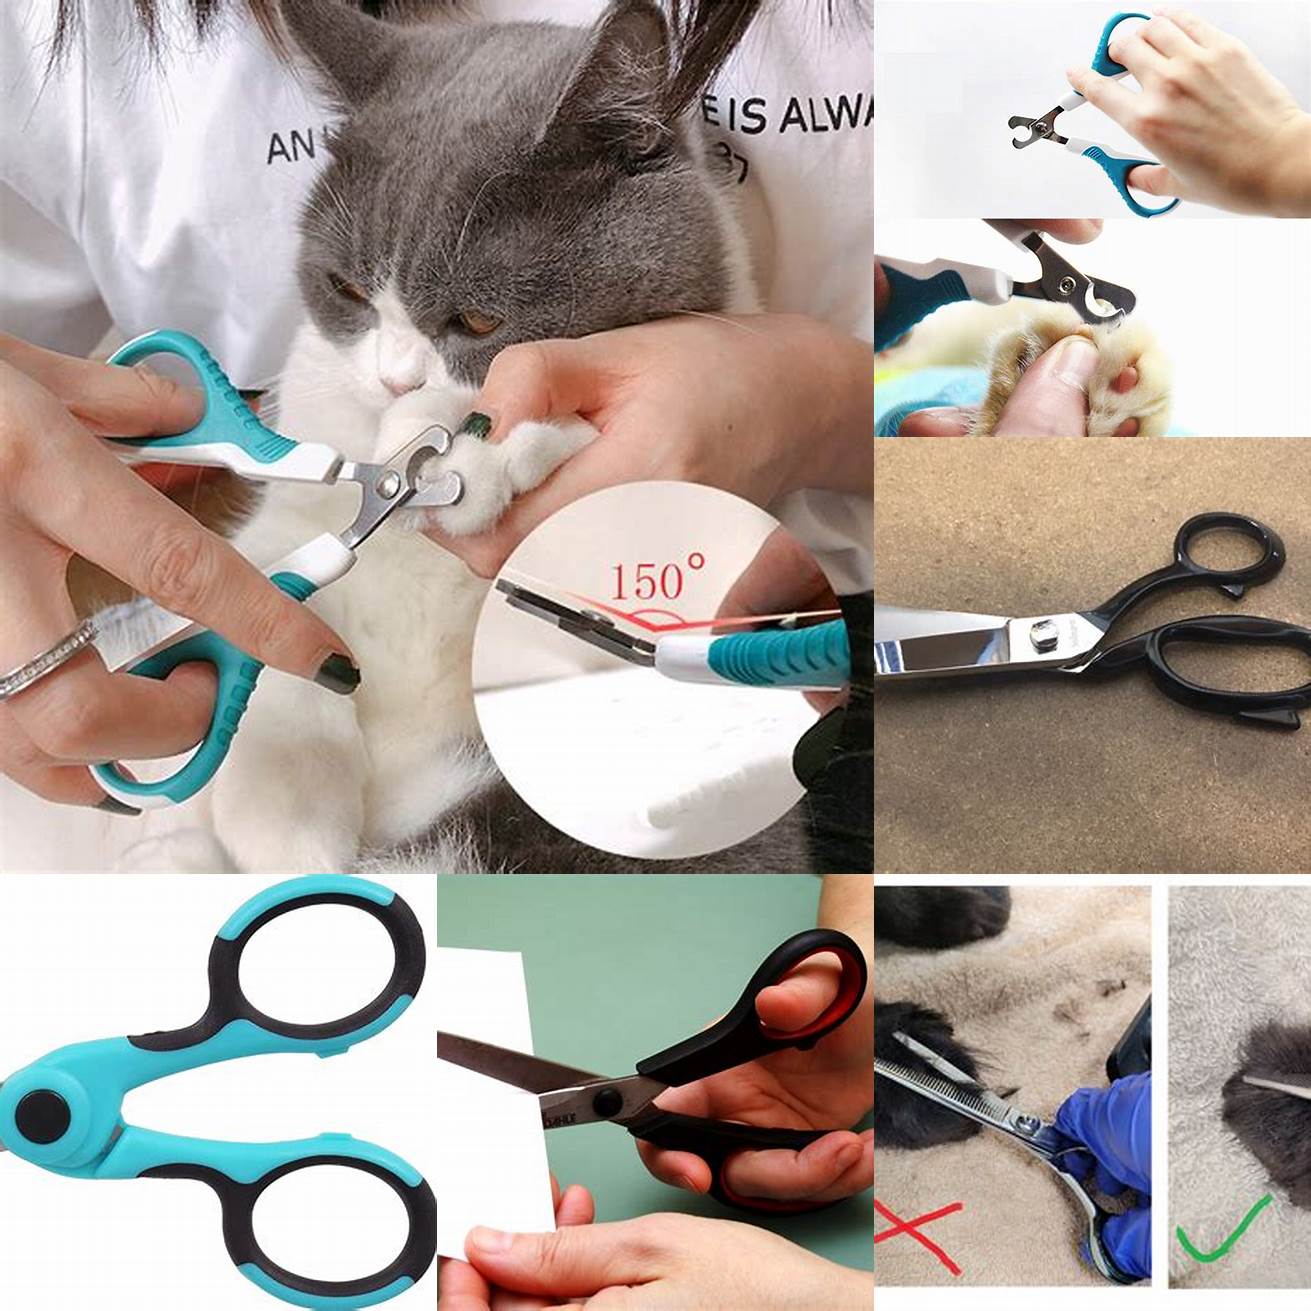 Trim any excess film with a sharp scissors or blade for a precise fit